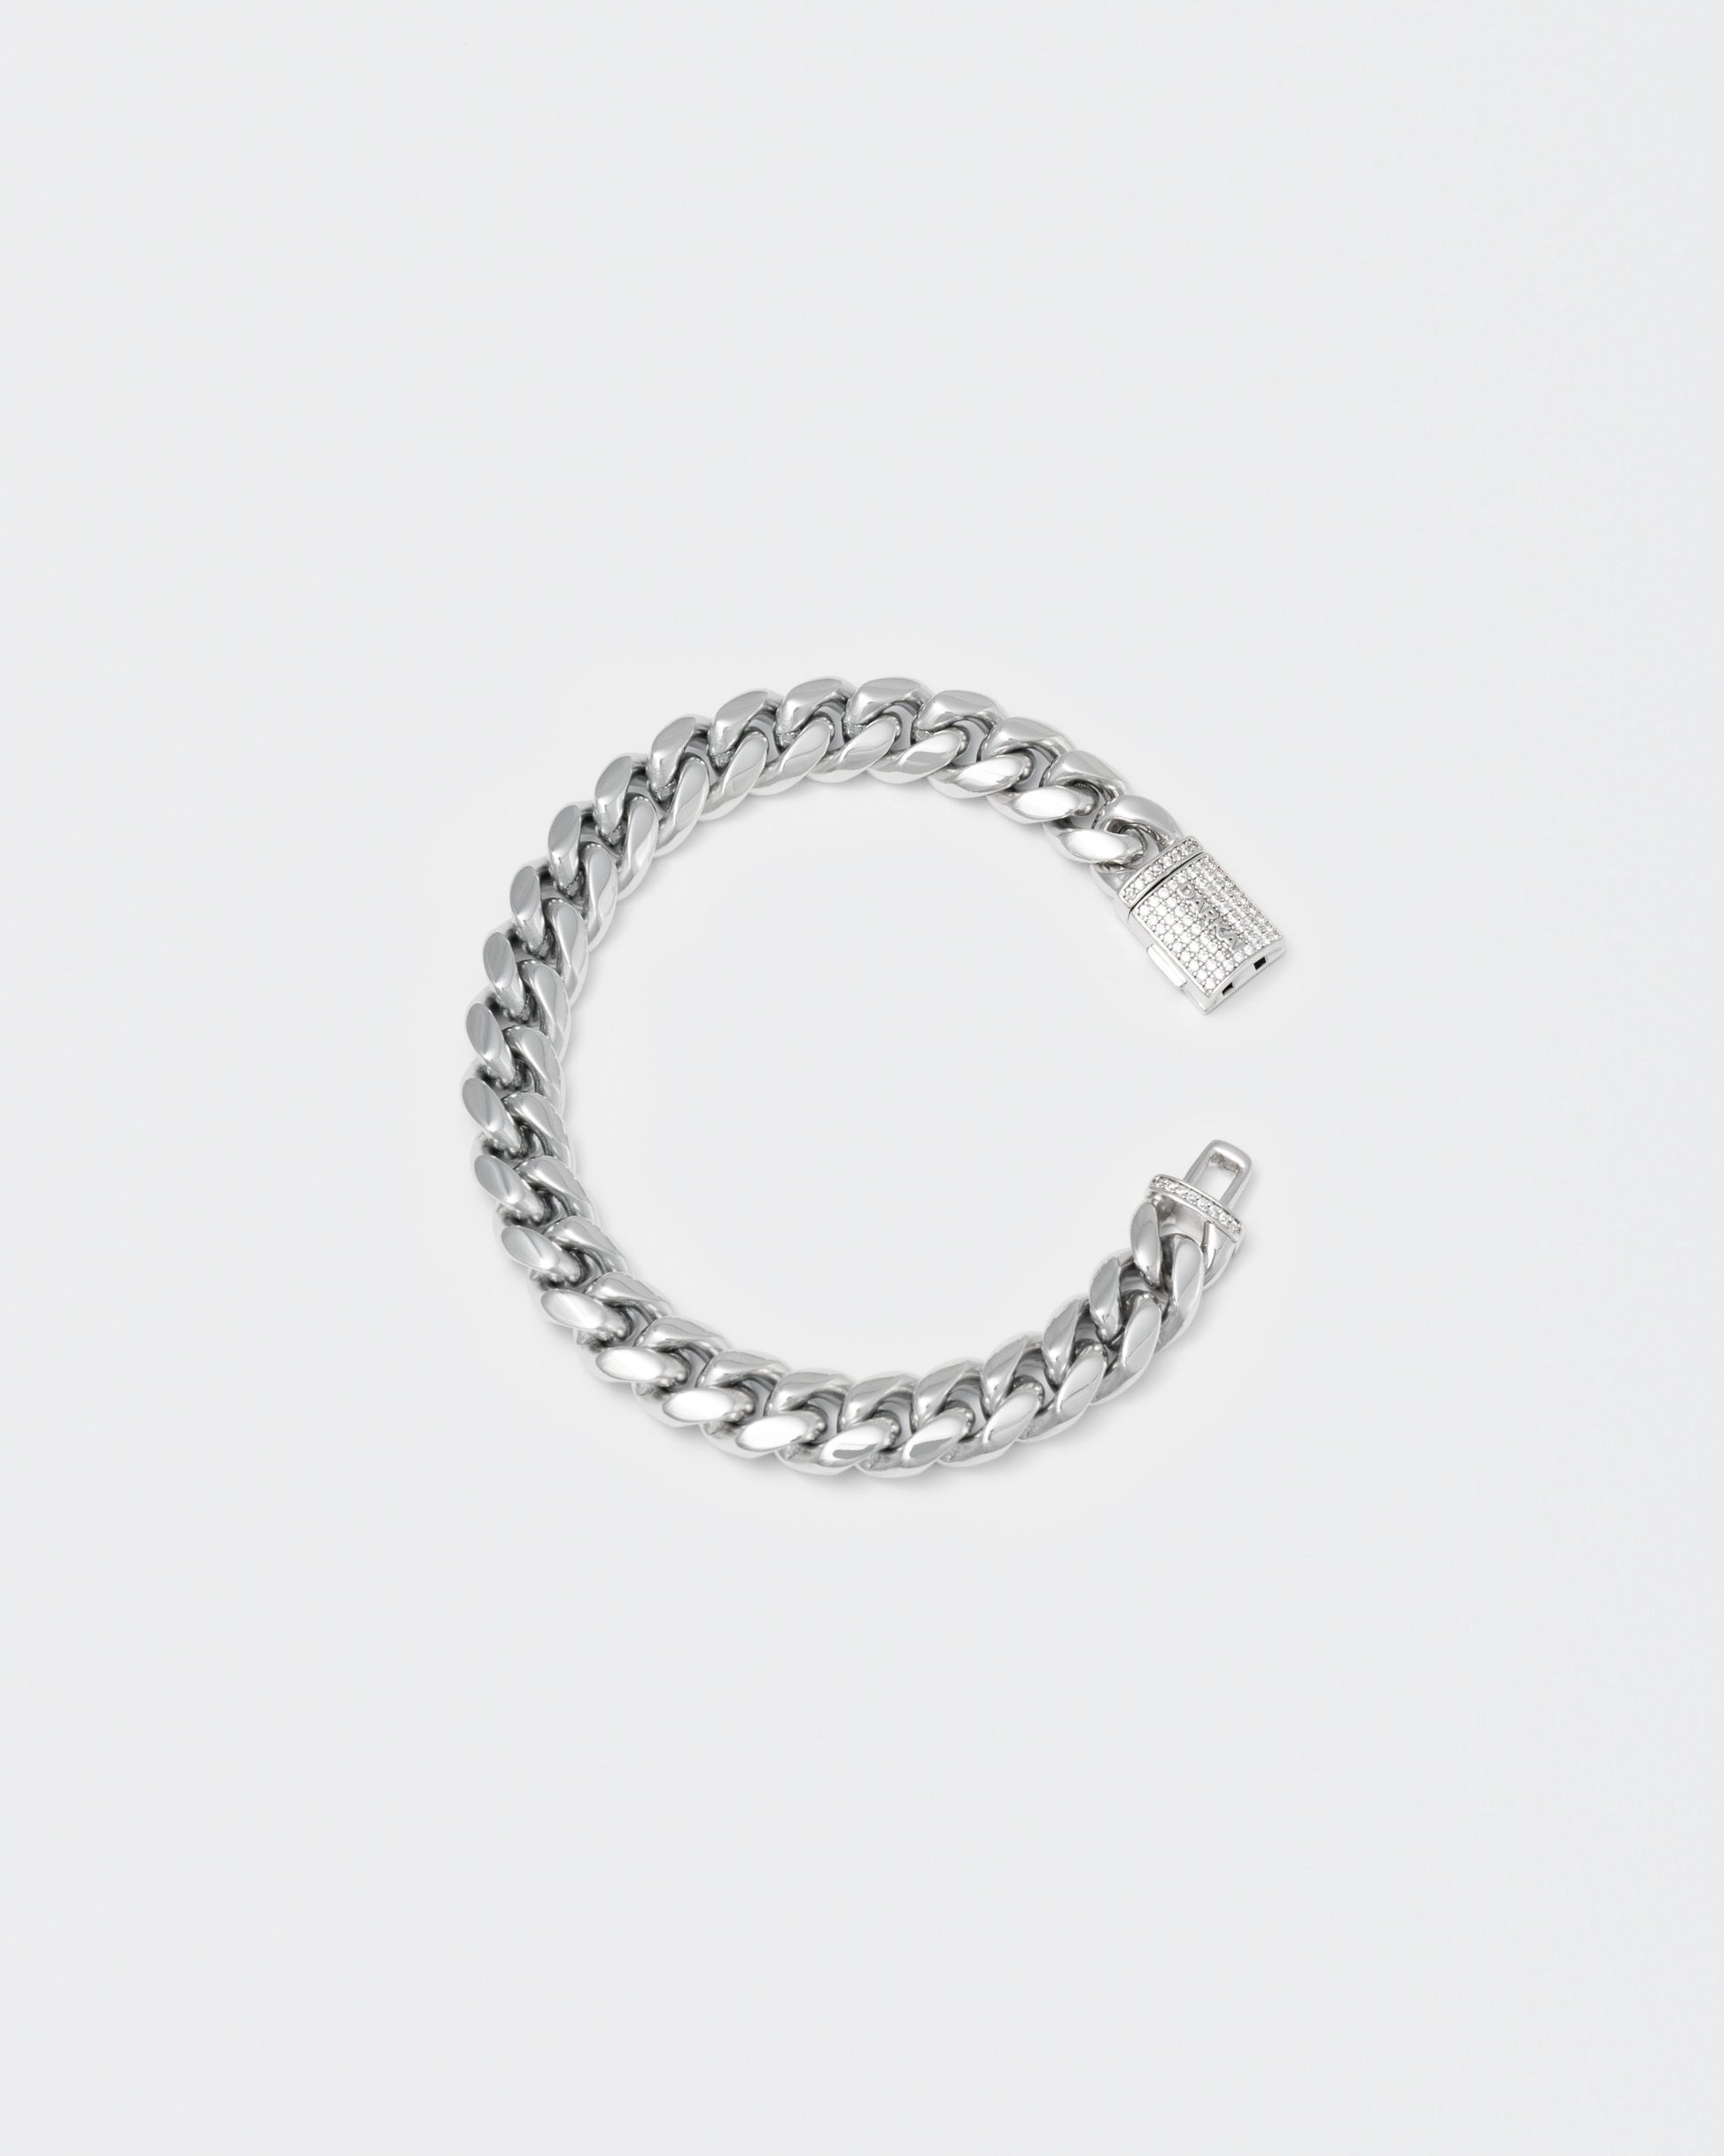 18k white gold coated cuban chain bracelet with hand-set micropavé stones in white